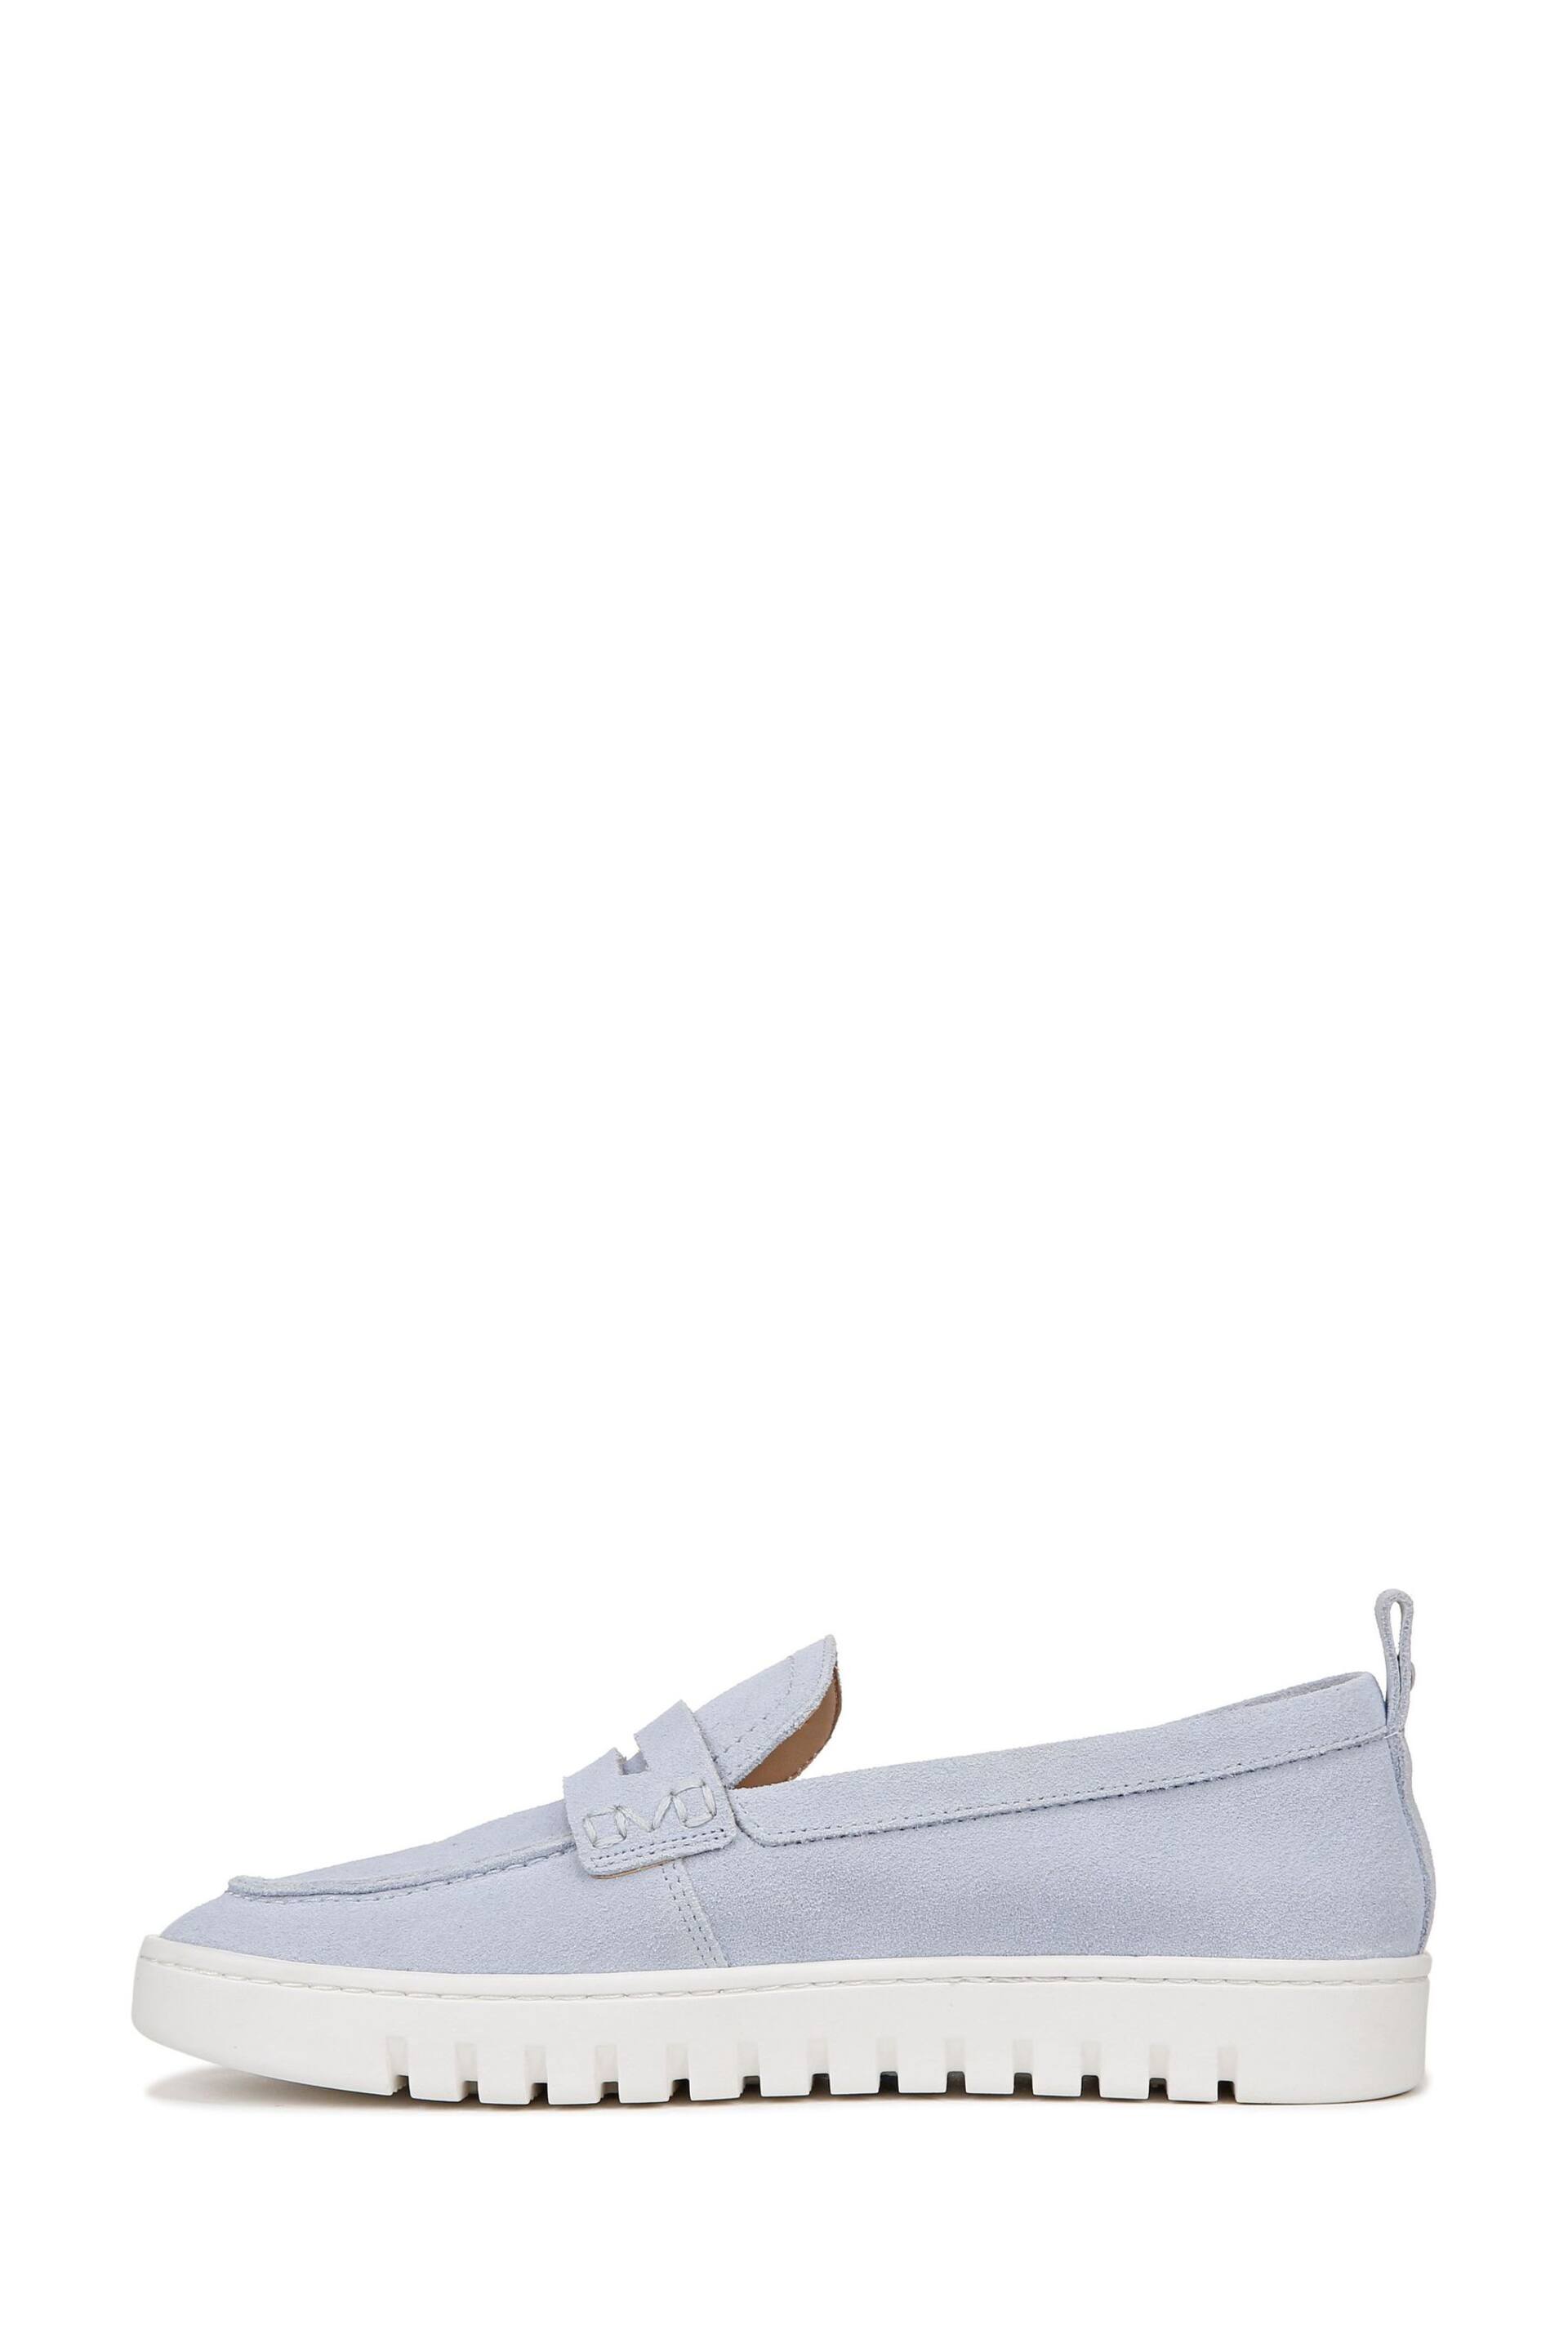 Vionic Uptown Suede Loafers - Image 2 of 6